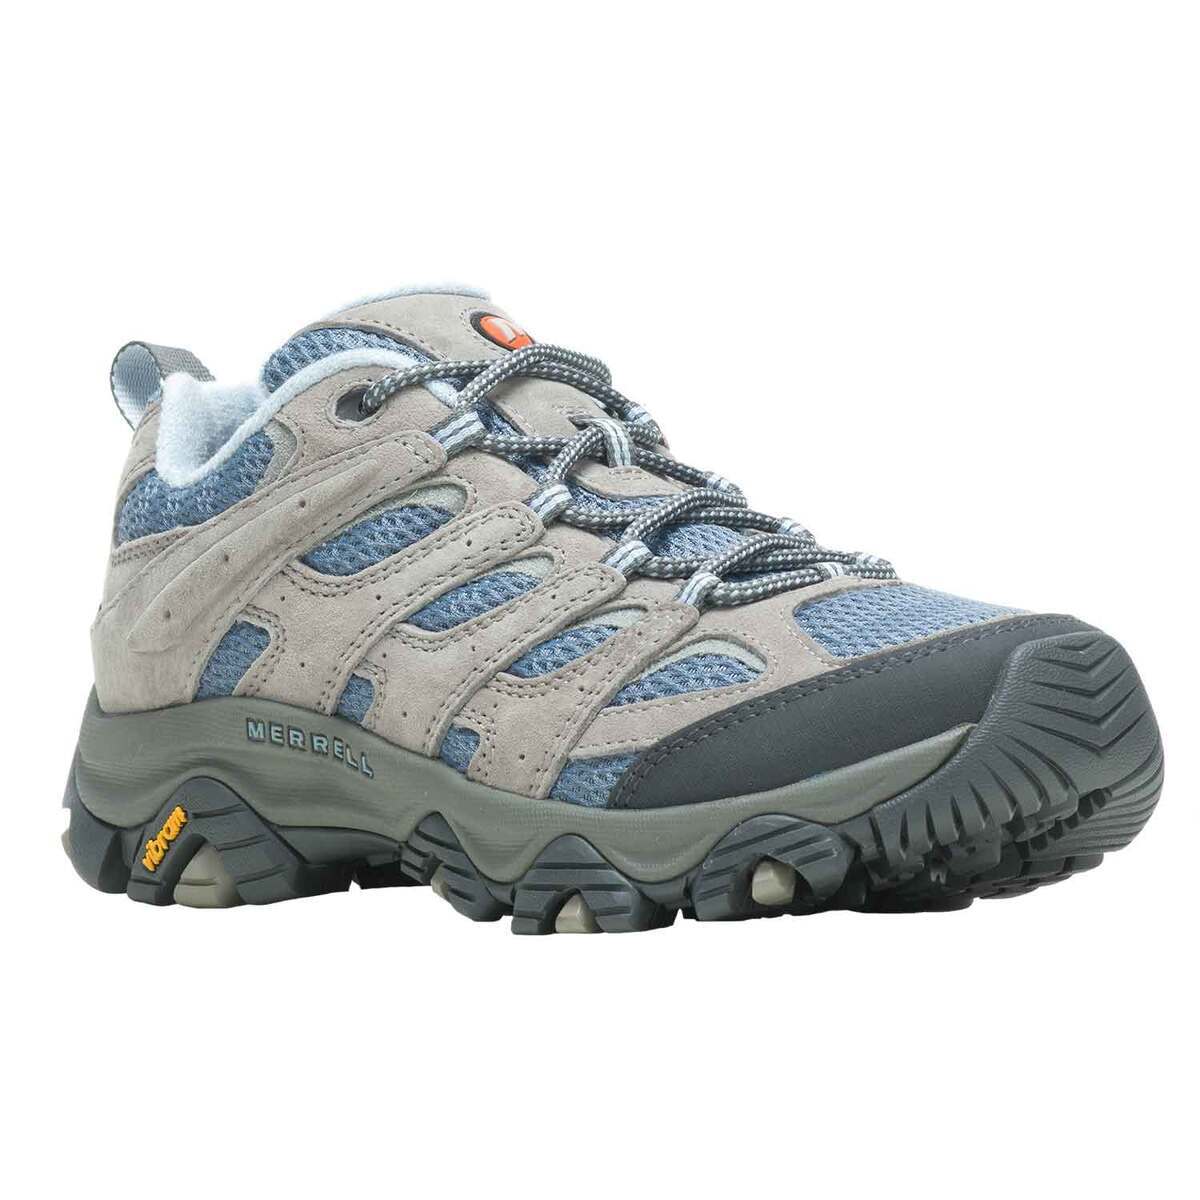 Merrell Bravada Women's Hiking Shoes Size 7 Green Sage Casual Athletic